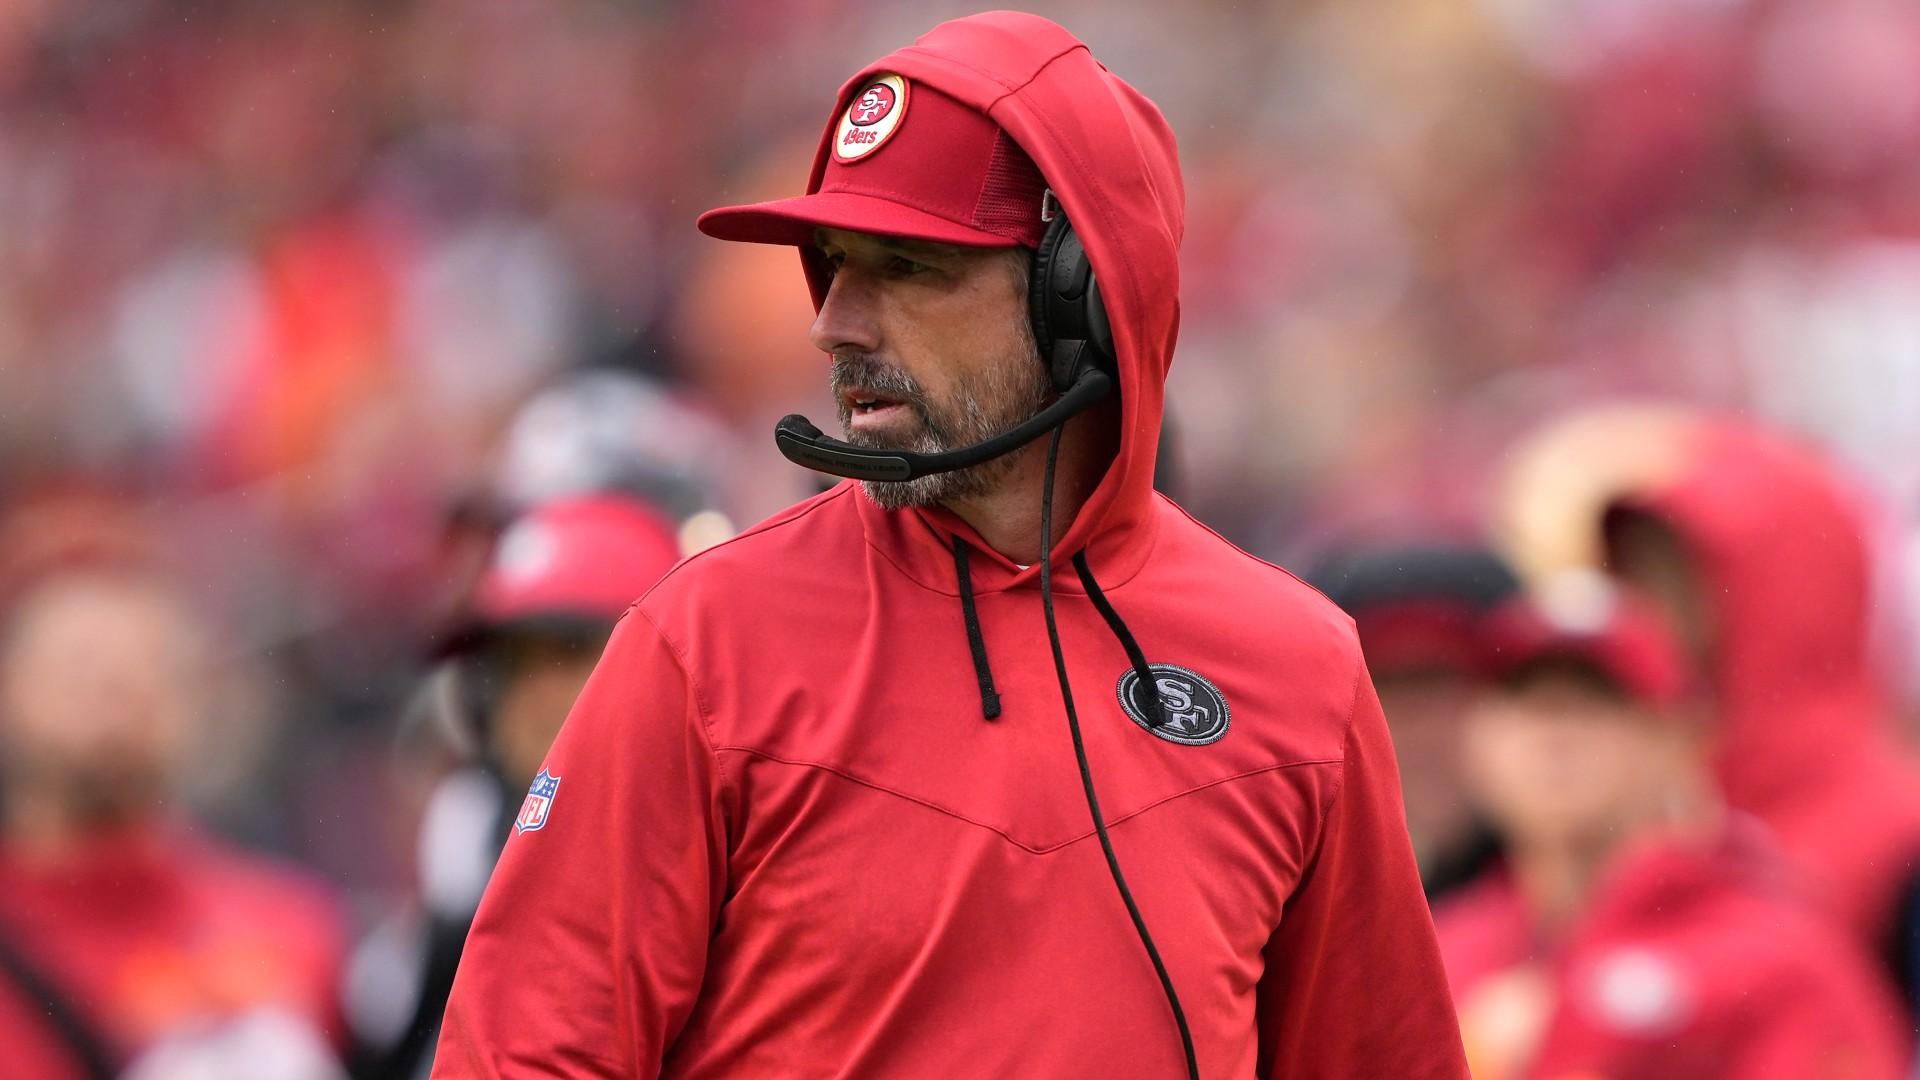 The Tension on the Field Kyle Shanahan's Super Bowl Discontent